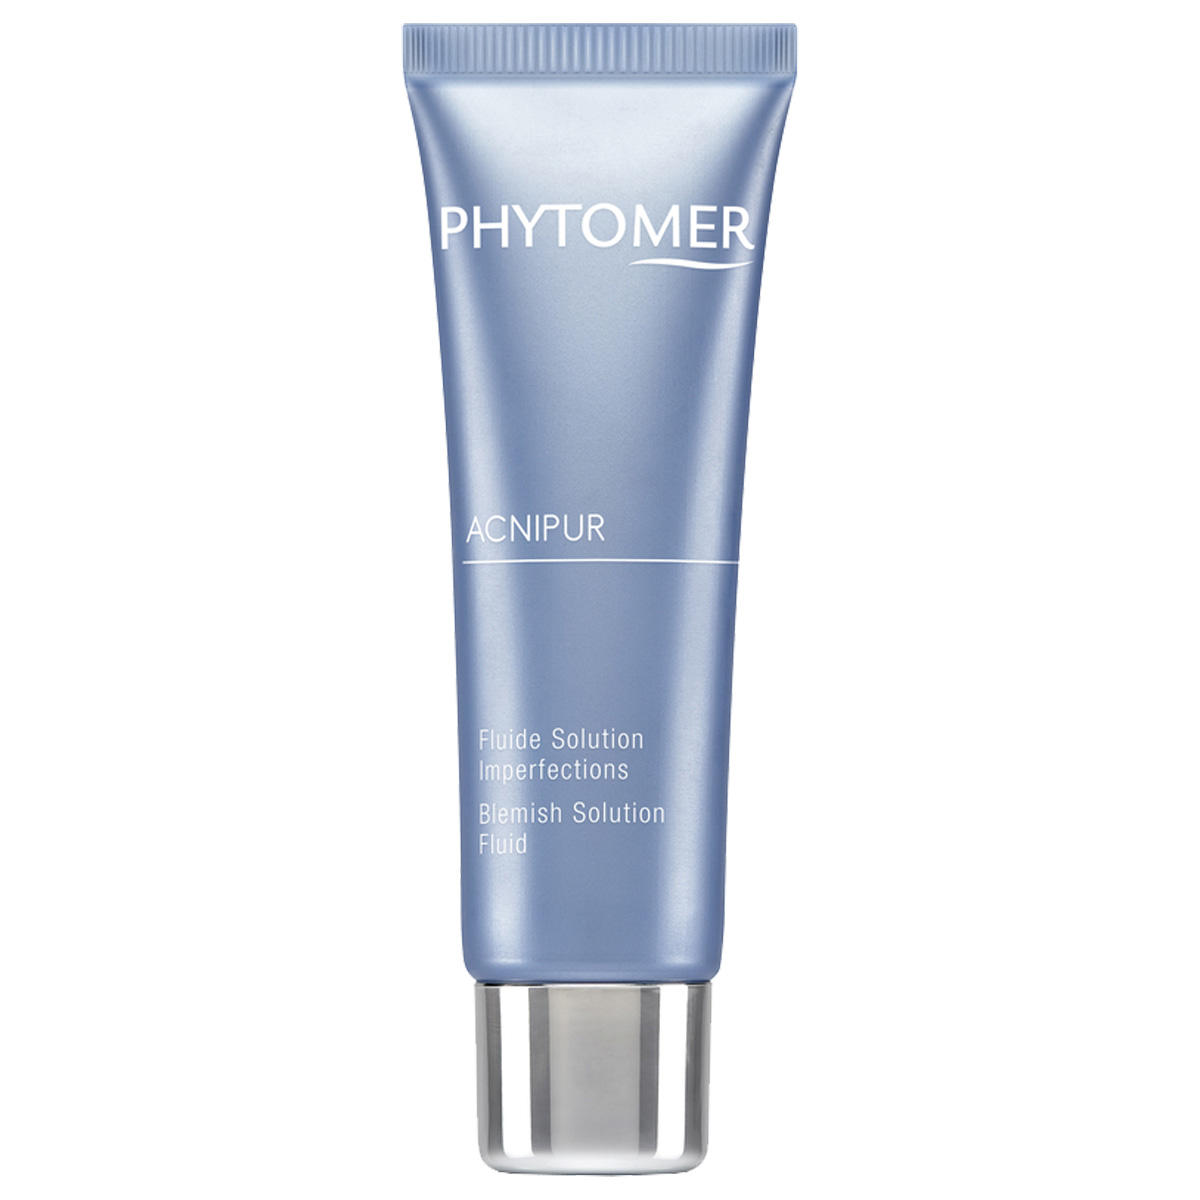 PHYTOMER ACNIPUR Fluide Solution Imperfections 50 ml - 1